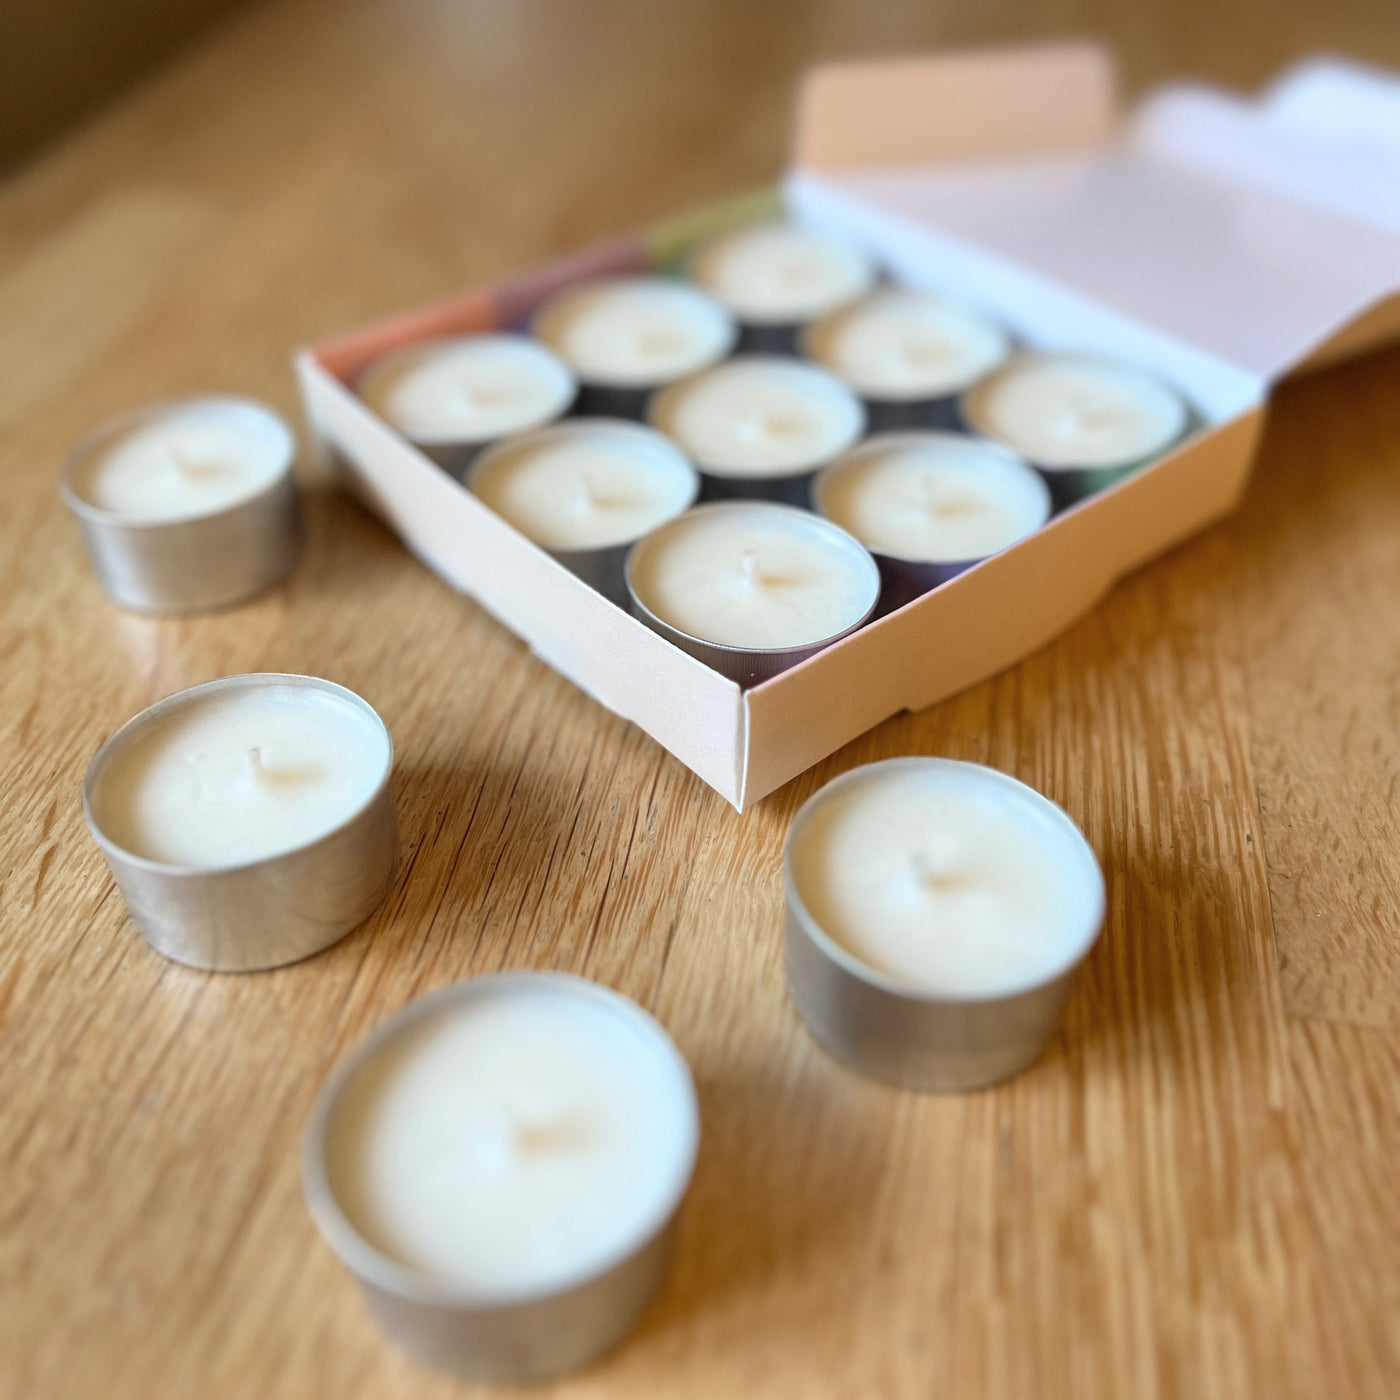 Our Spring candle collection brings a trio of seasonal uplifting scents into your home with our 9 tealights. Hand poured in England using sustainable plant-based wax.